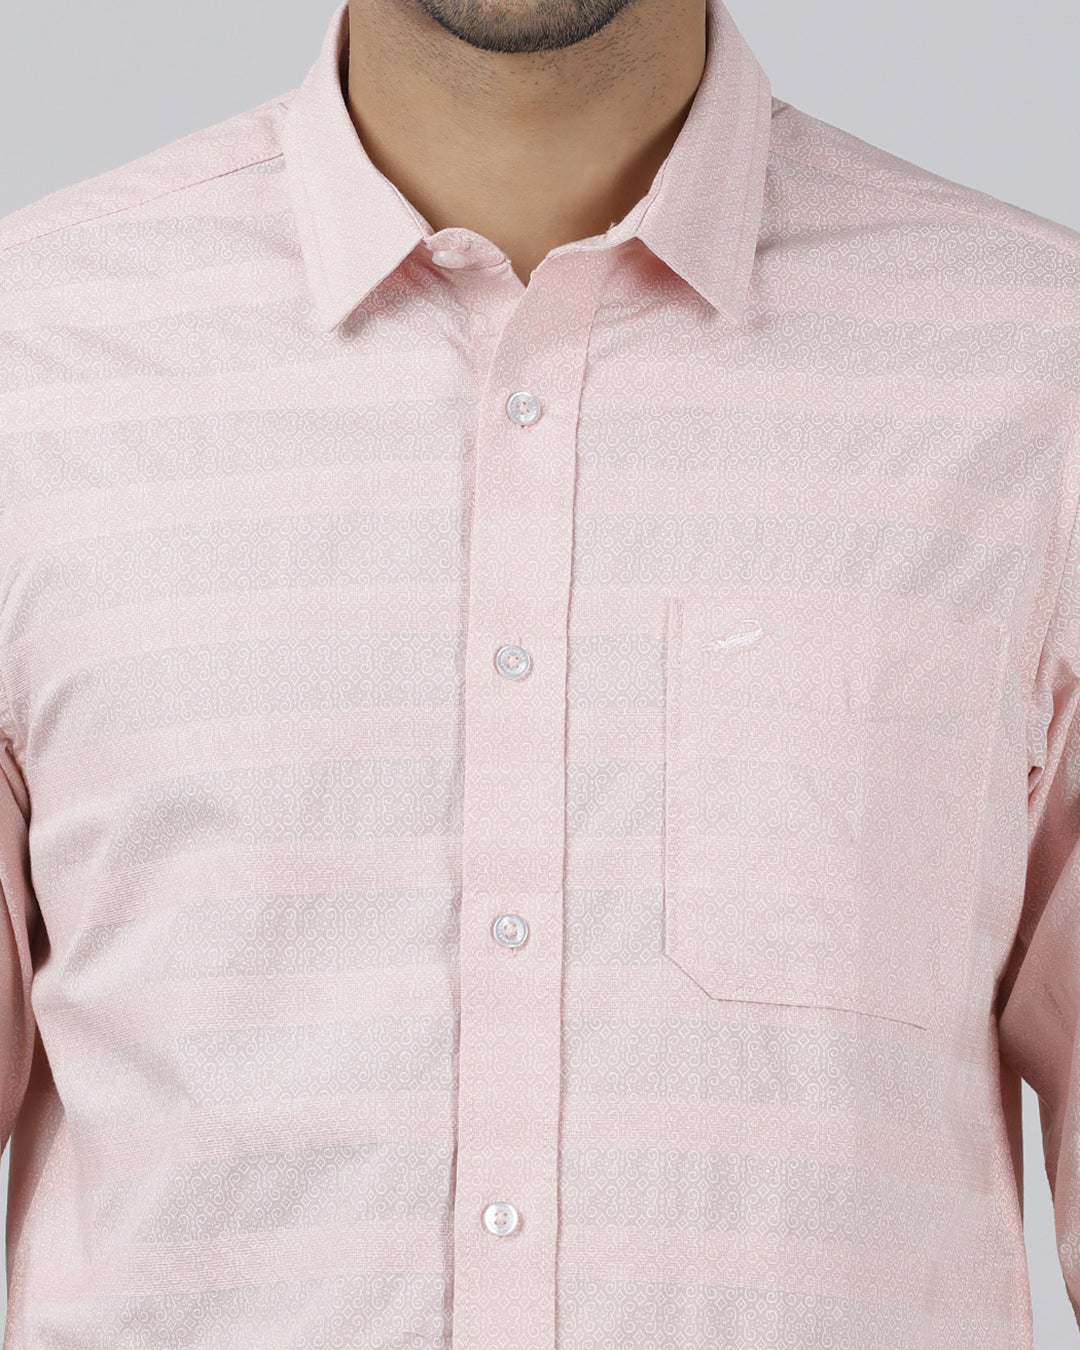 Casual Pink Full Sleeve Regular Fit Print Shirt with Collar for Men